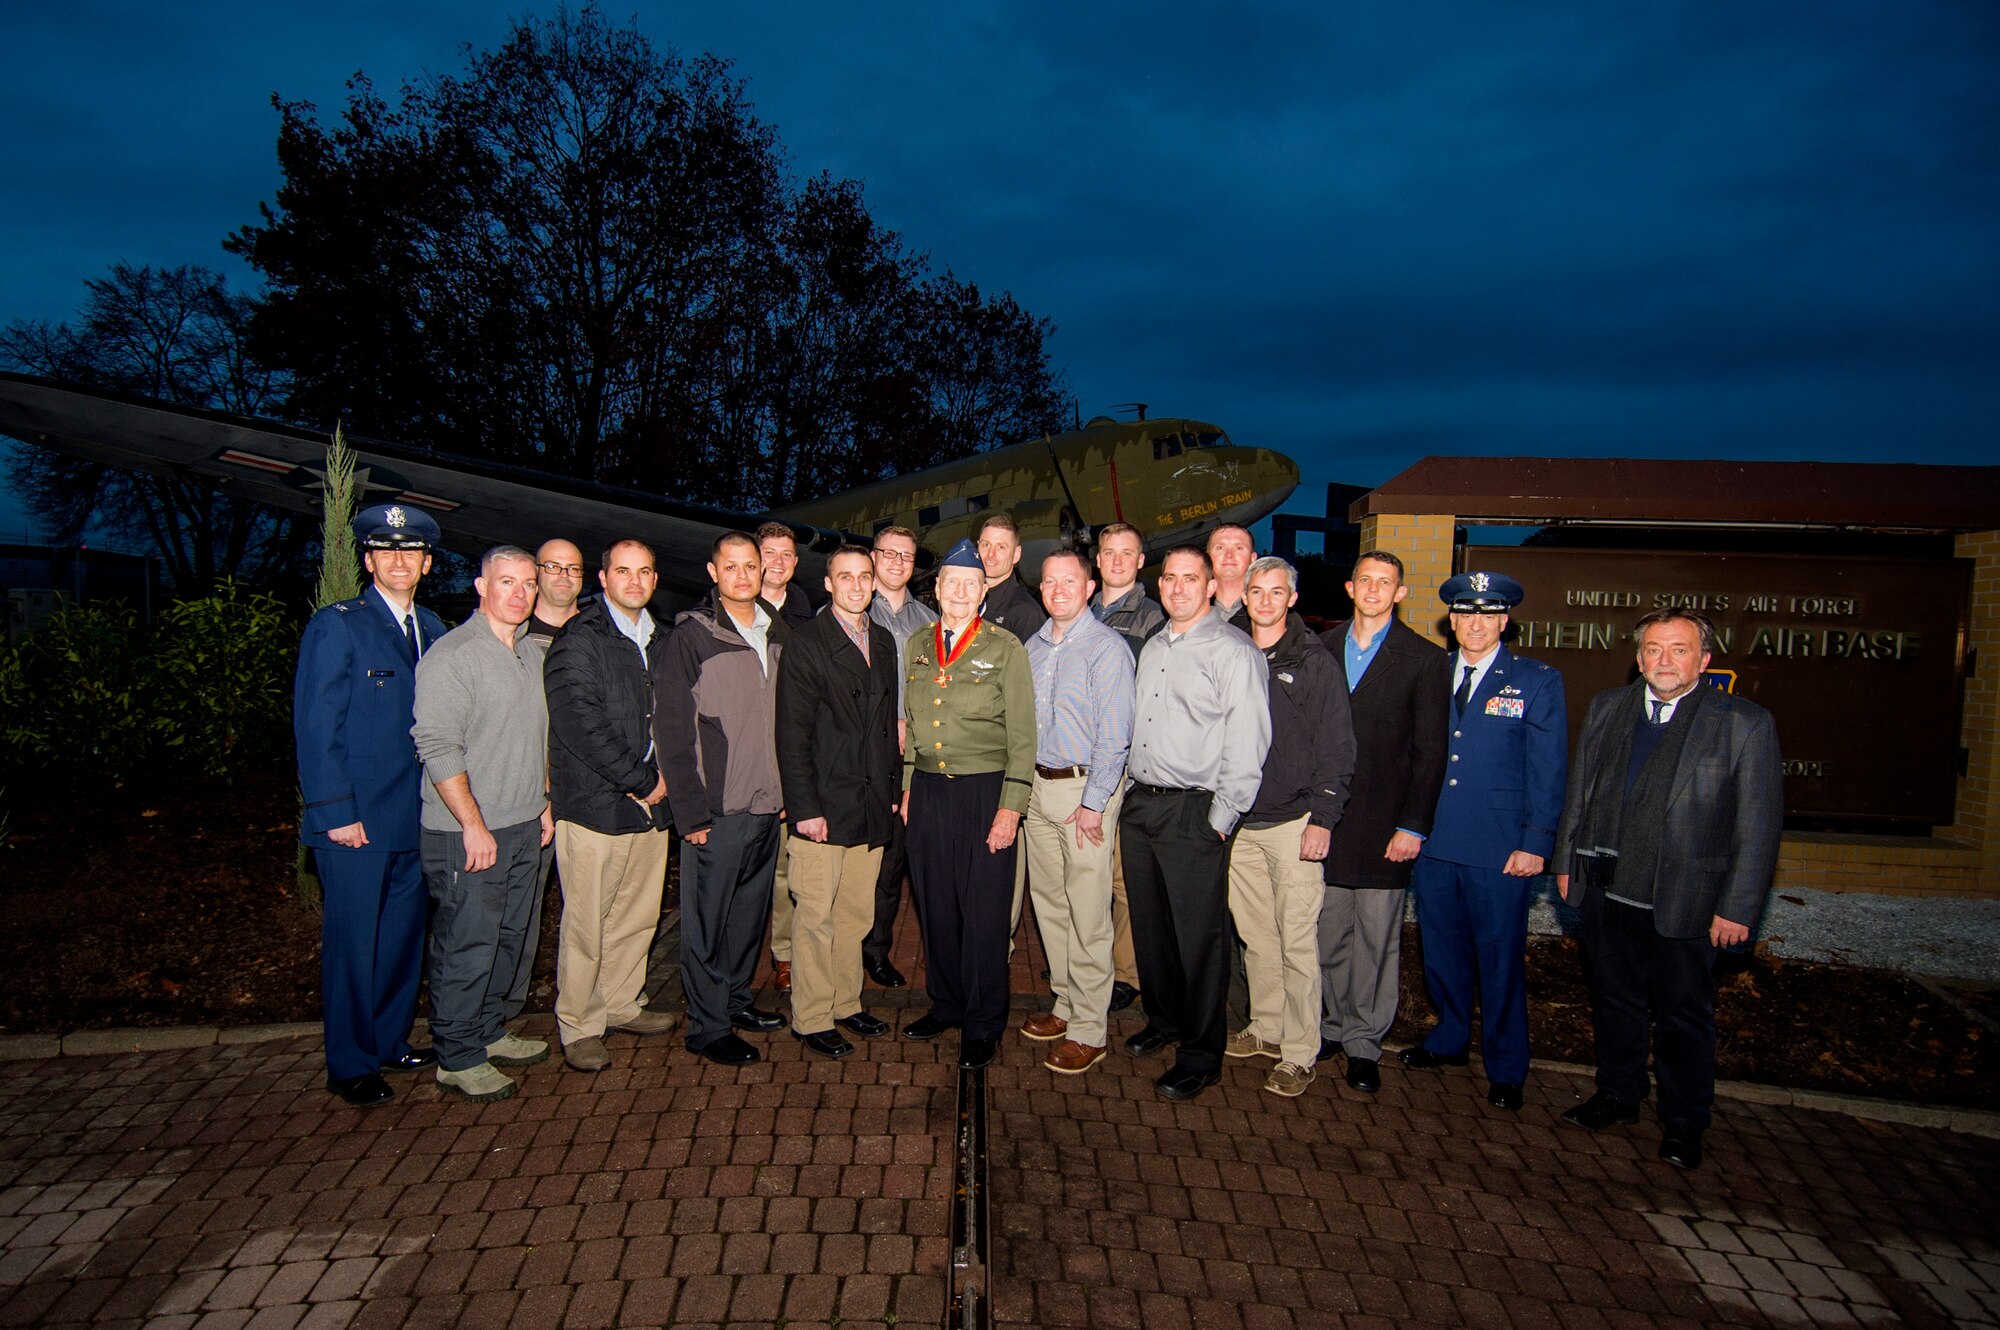 Retired U.S. Air Force Col. Gail Halvorsen, a C-52 Skymaster pilot also known as the Candy Bomber, center, poses with U.S. Air Forces in Europe Airmen from Spangdahlem Air Base, Germany, and Ramstein Air Base, Germany, after the reopening ceremony of the Berlin Airlift Memorial outside Frankfurt International Airport, Germany, Nov. 22, 2016. Most of the Airmen serve with the 726th Air Mobility Squadron, which traces its lineage to Halvorsen's efforts as part of the airlift, which delivered more than two million tons of food to the blockaded citizens of West Berlin between June 1948 and October 1949. (U.S. Air Force photo by Staff Sgt. Joe W. McFadden)